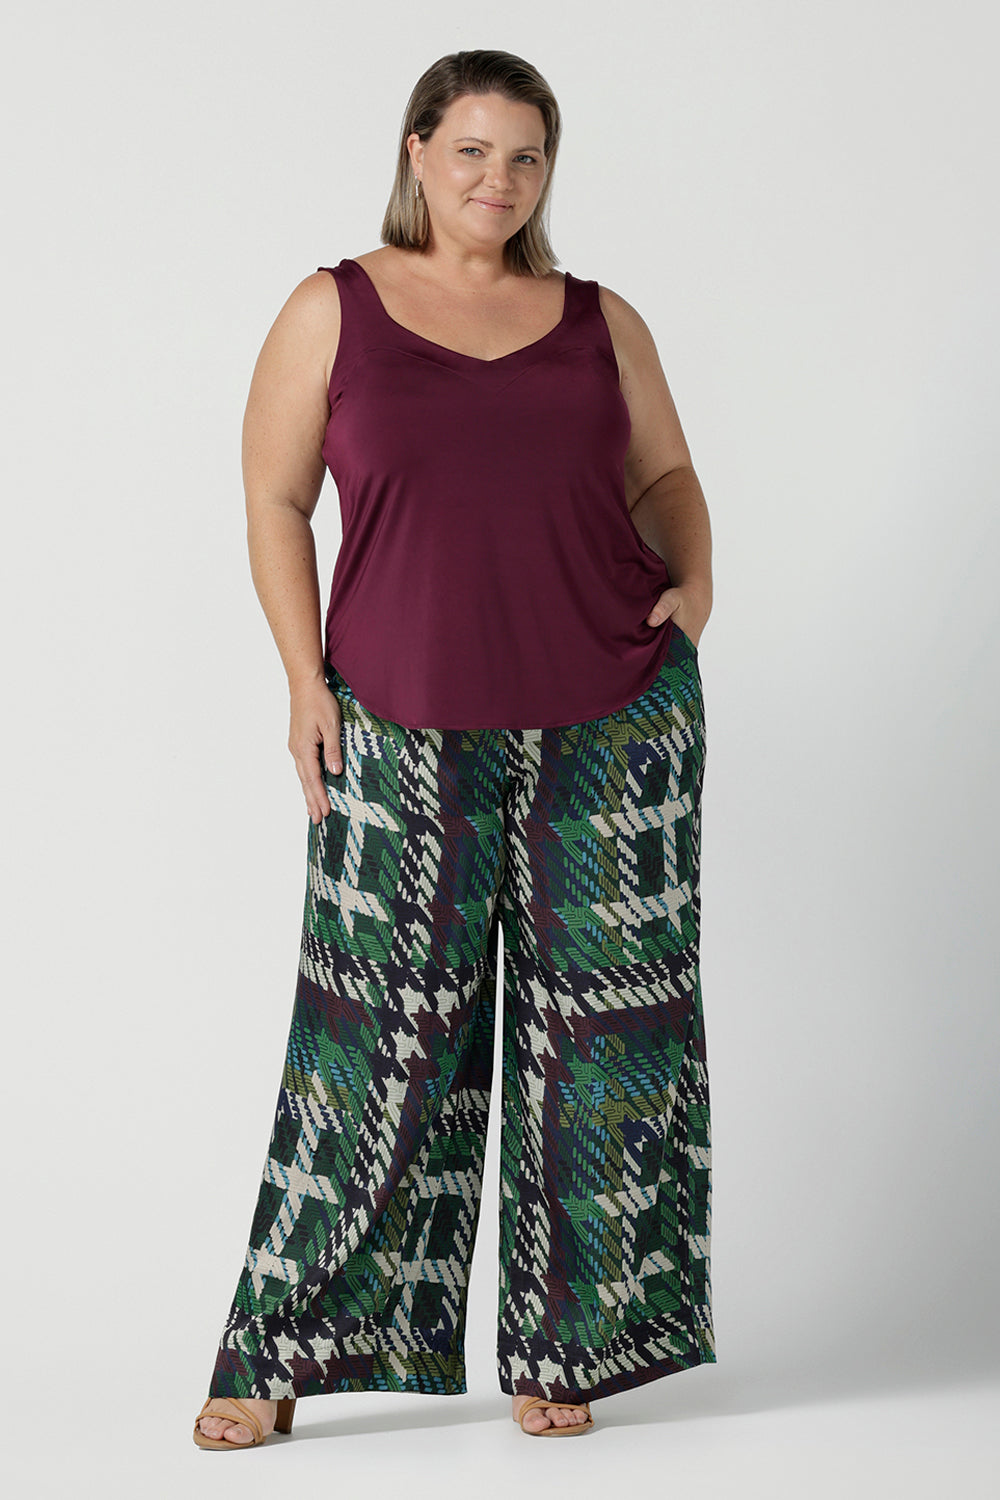 Size 18 Woman wears the Ellery Pant in Silky Italian Viscose. Size inclusive fashion. Tailored pants for work to event dressing. Made in Australia for women size 8 - 24.